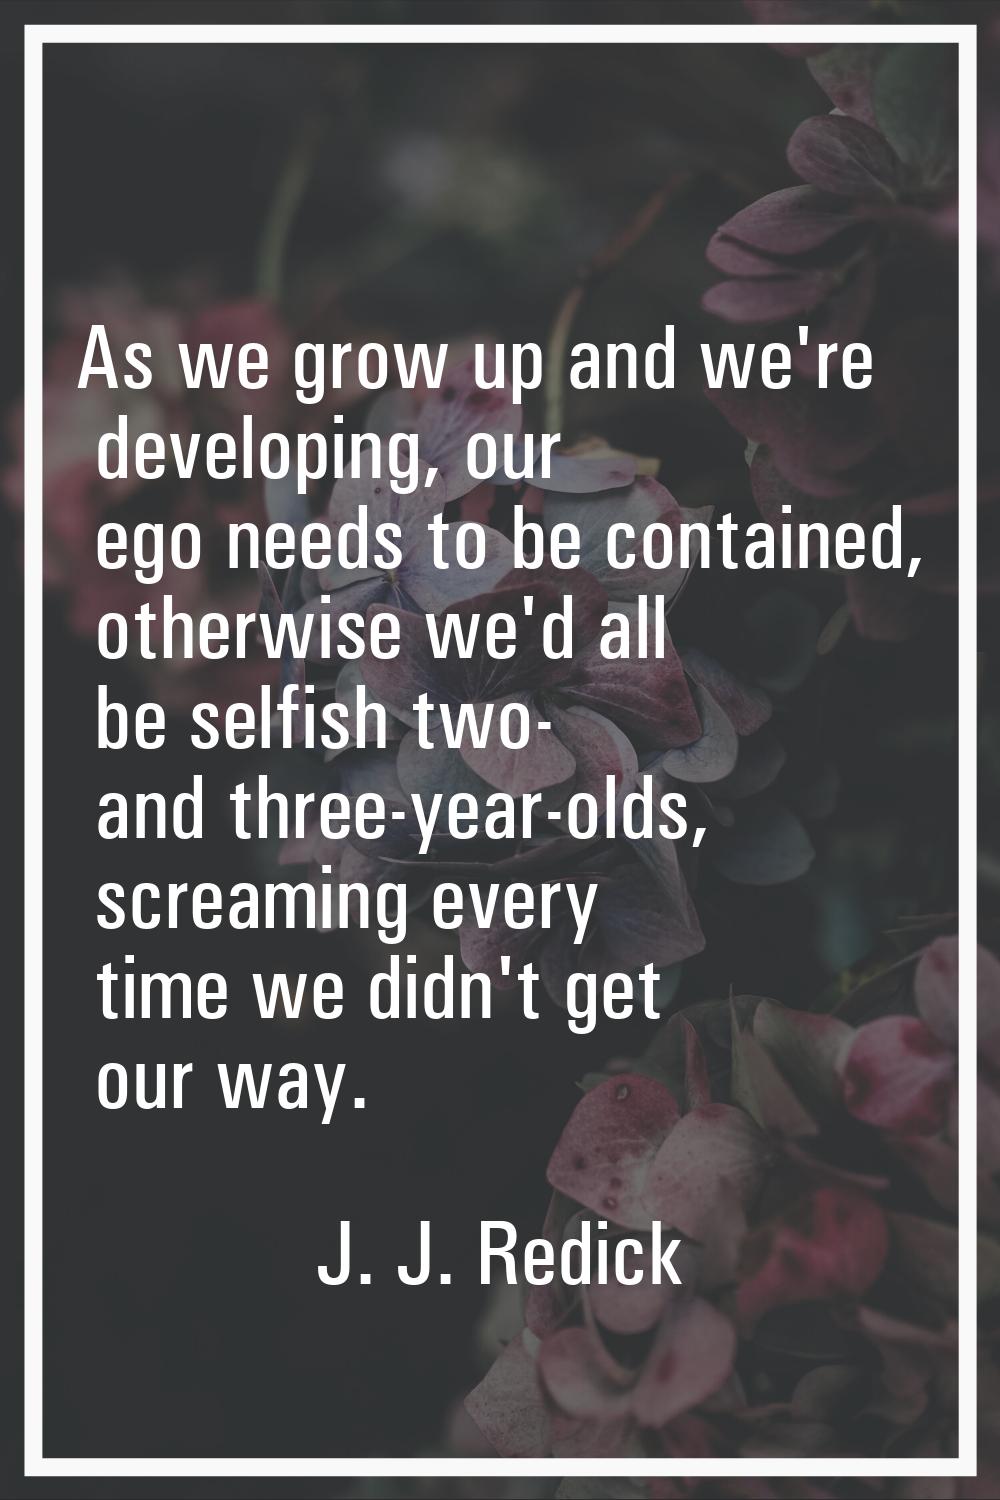 As we grow up and we're developing, our ego needs to be contained, otherwise we'd all be selfish tw